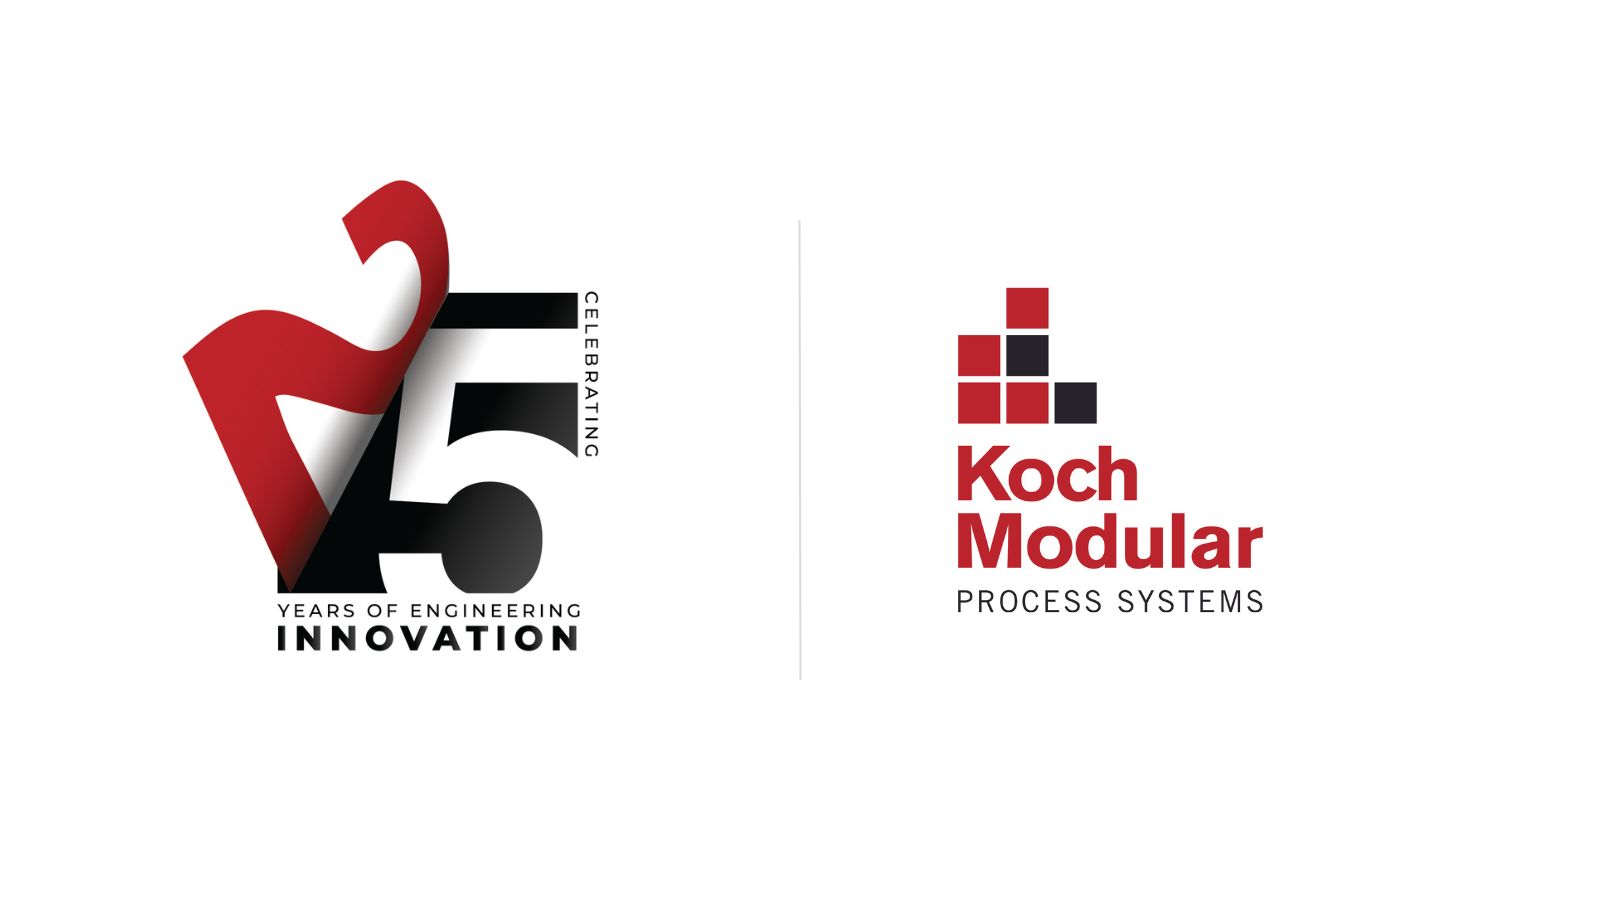 Koch Modular to Expand State-of-the-Art Pilot Plant in Houston, Texas